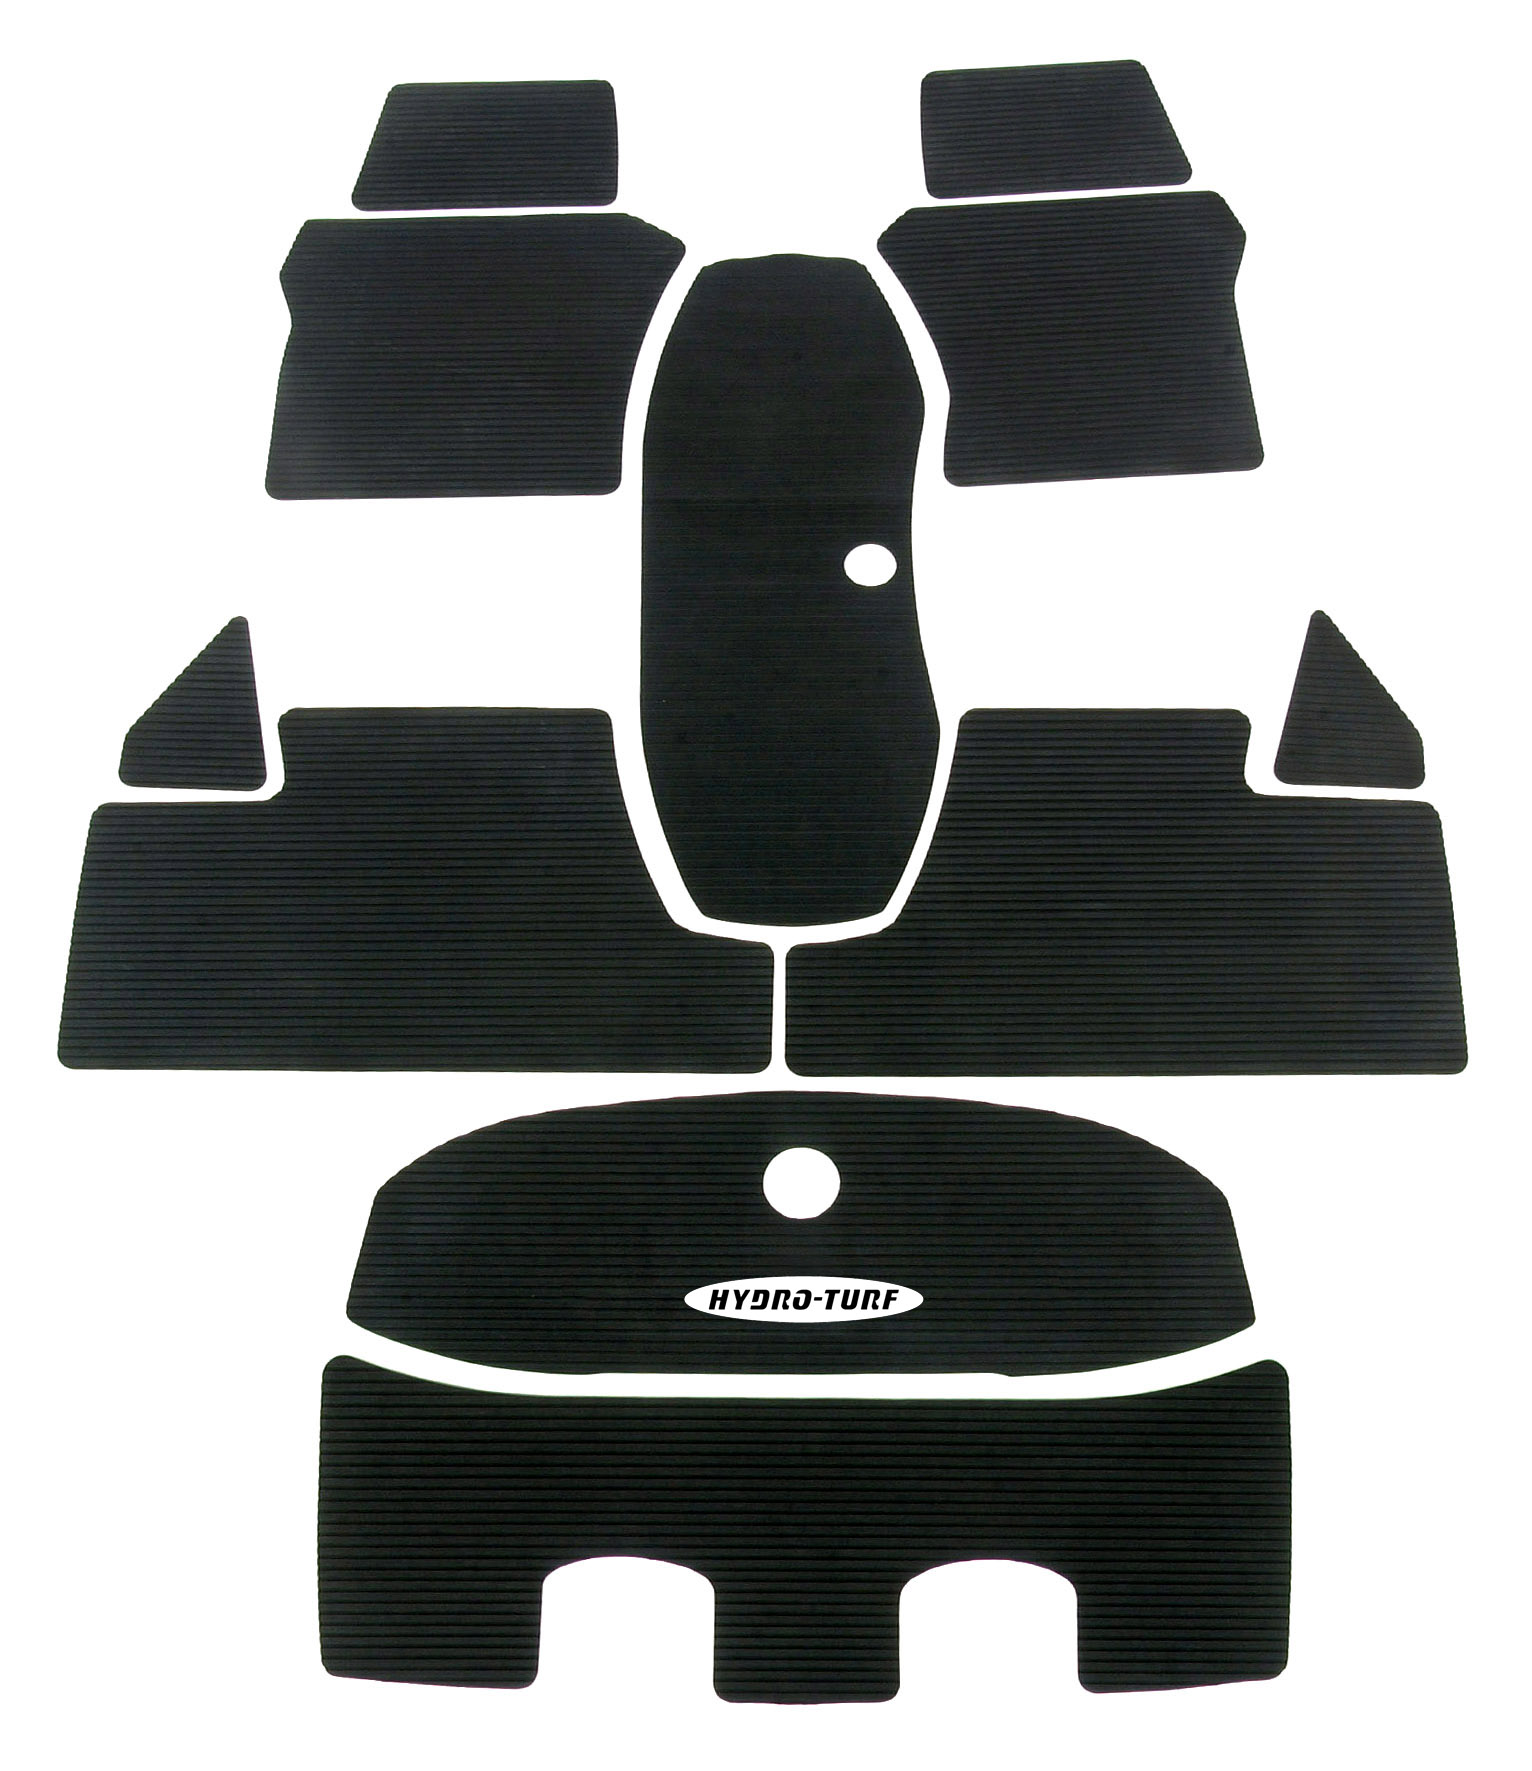 Hydro Turf Mat Kit For Yamaha Jet Boat Xr1800 - Y03 - Click Image to Close